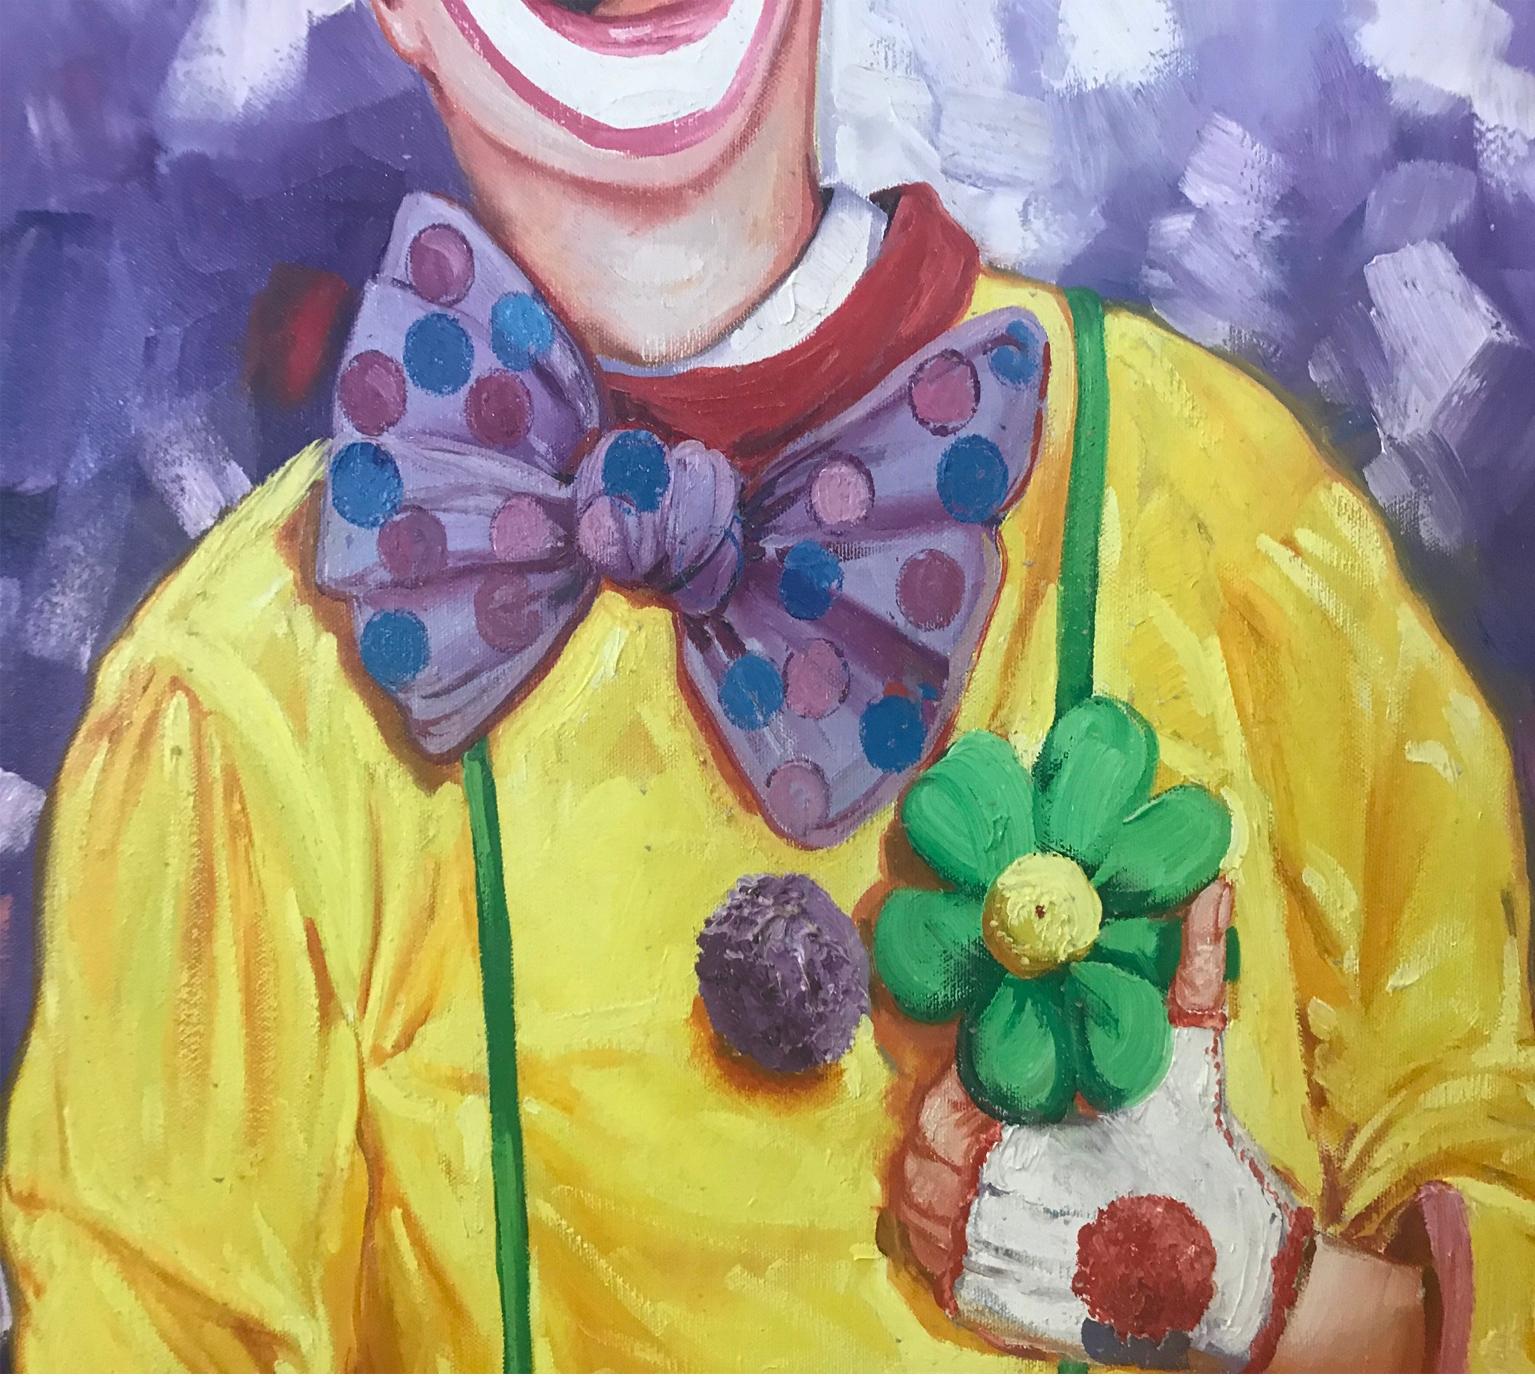 Figurative, Clown - Realist Painting by Unknown